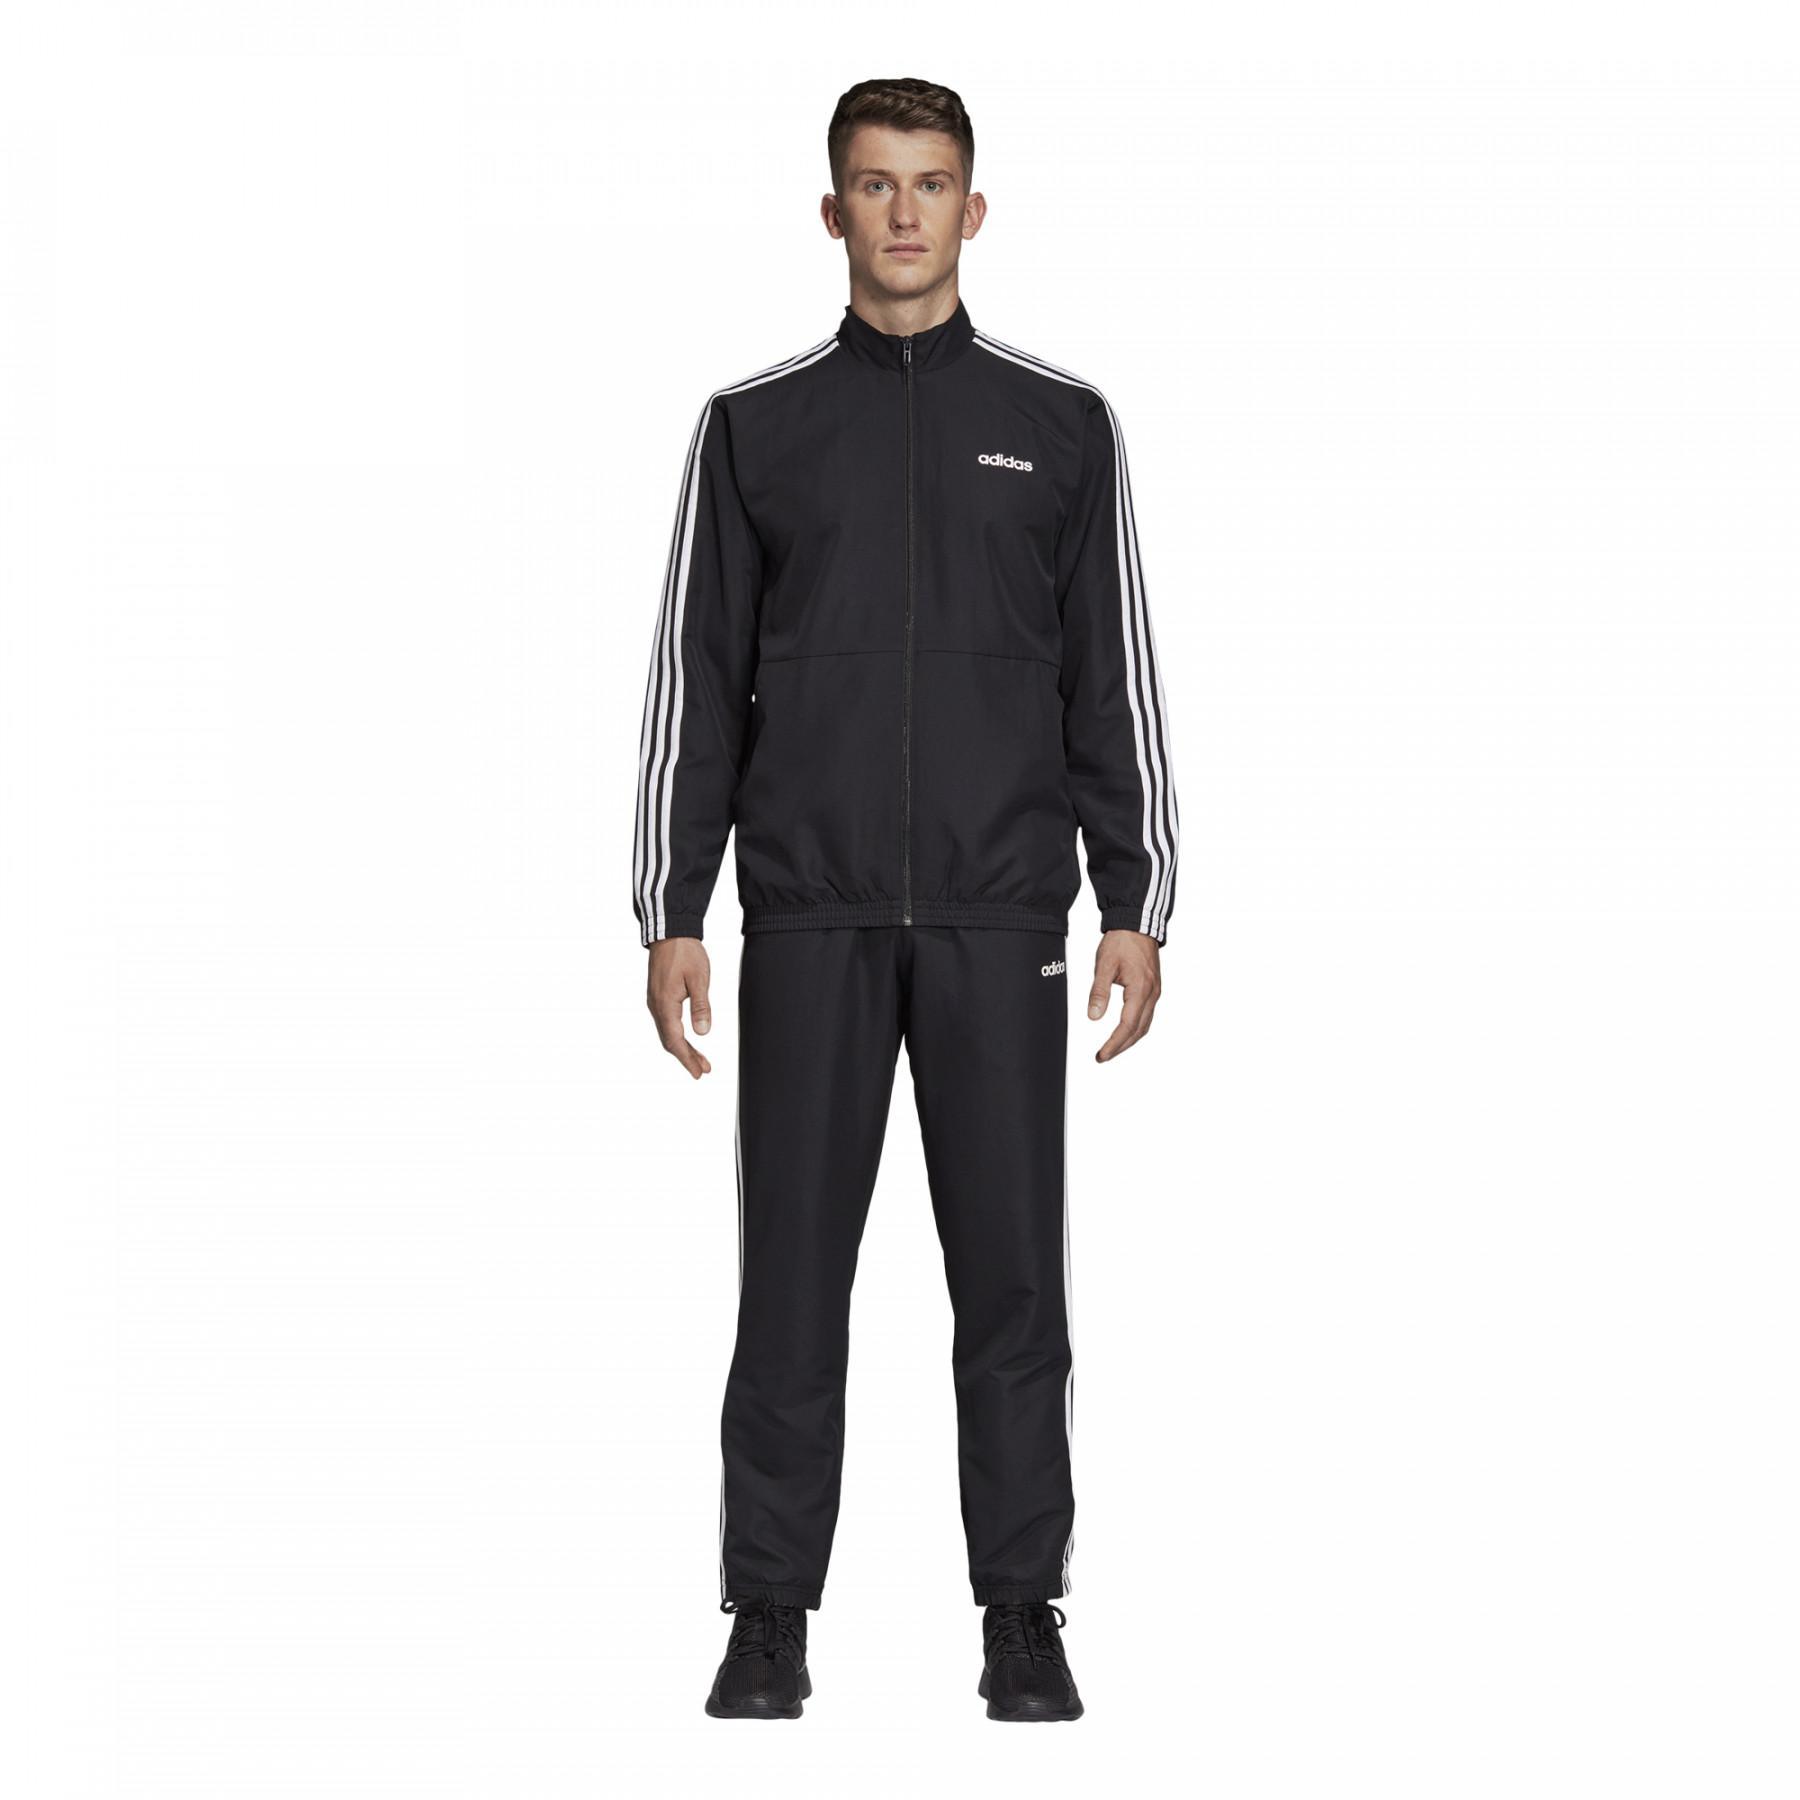 Tracksuit adidas 3-Stripes Woven